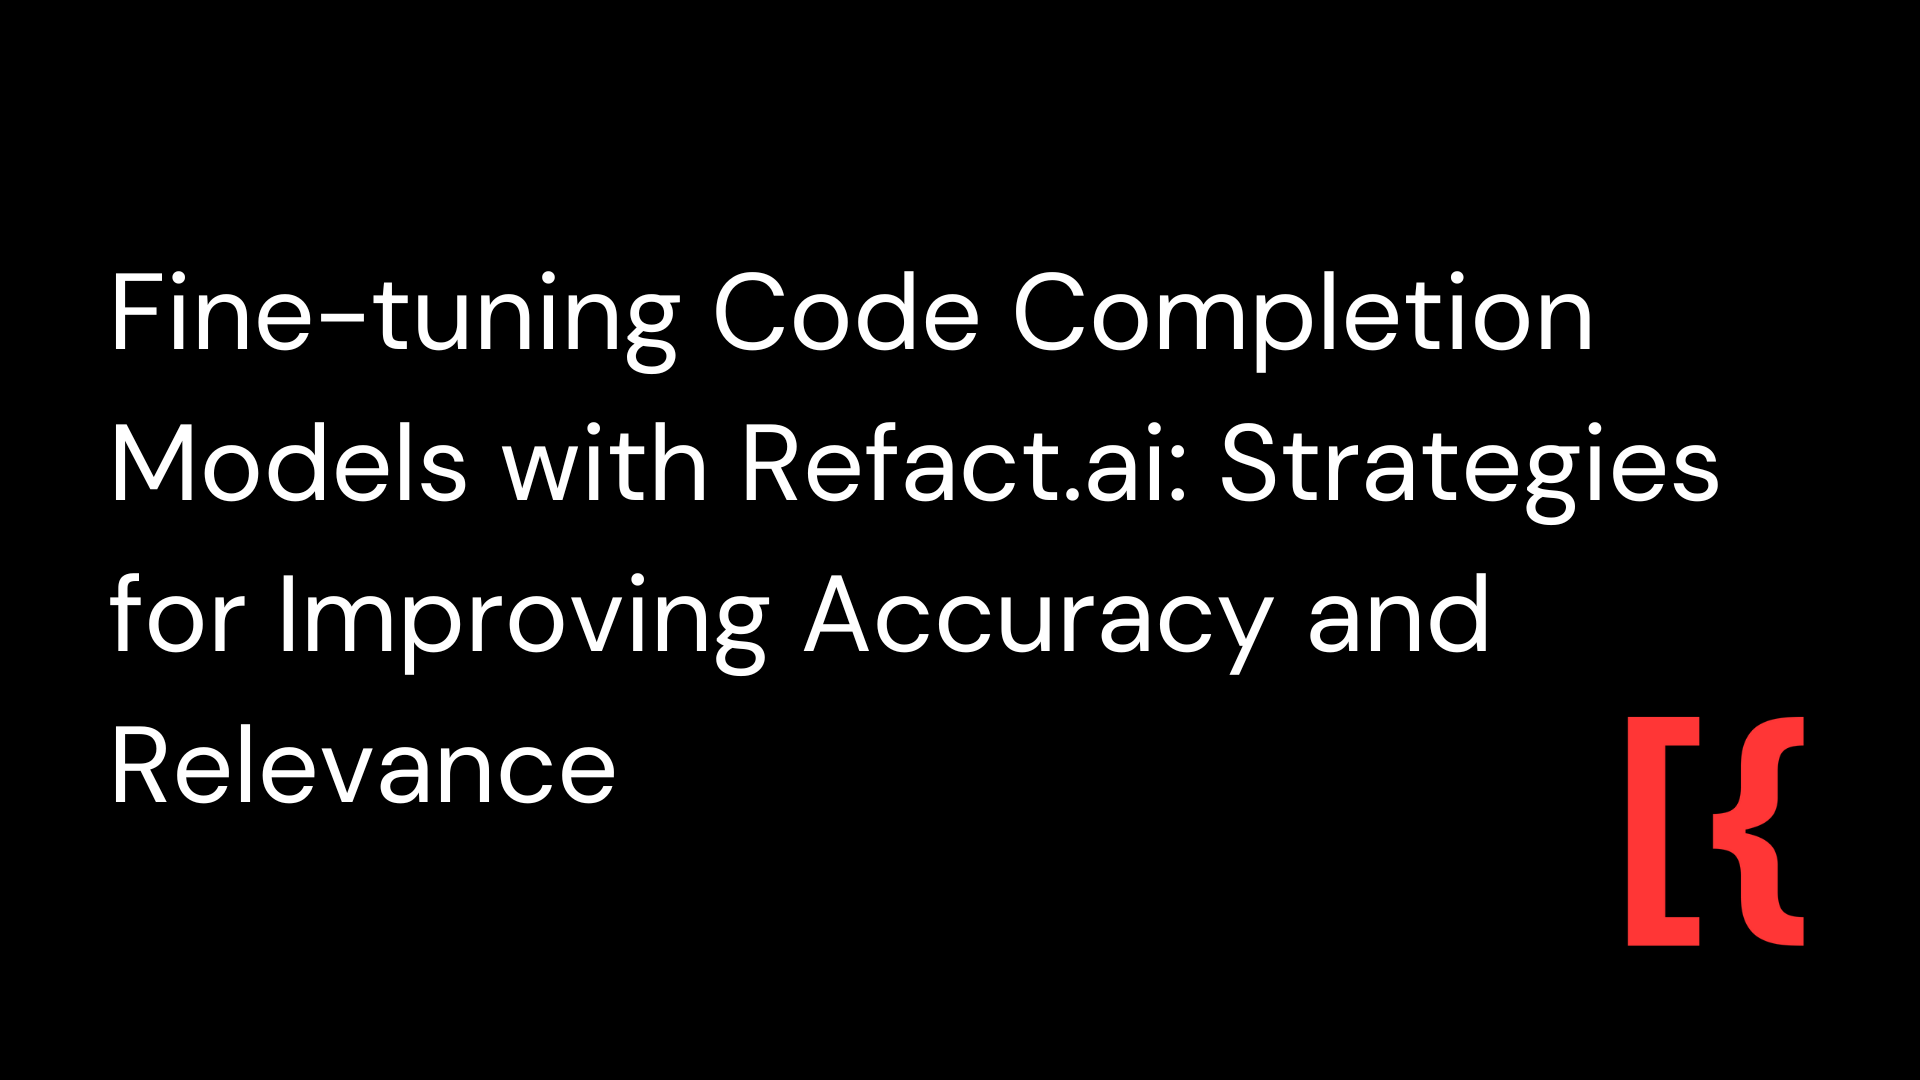 Fine-tuning Code Completion Models with Refact.ai: Strategies for Improving Accuracy and Relevance